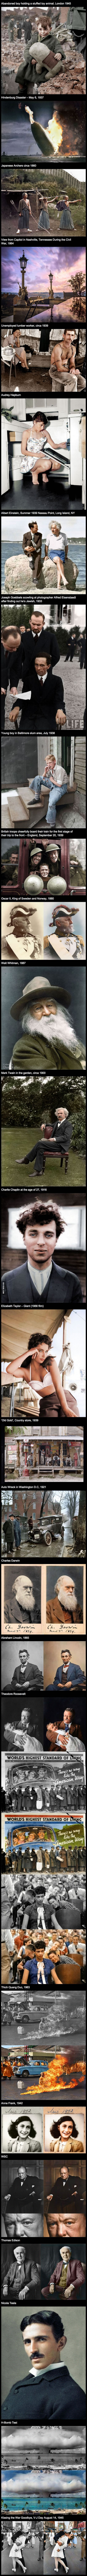 29 Colorized Historical Photos That Make The Past Seem Not So Far Away